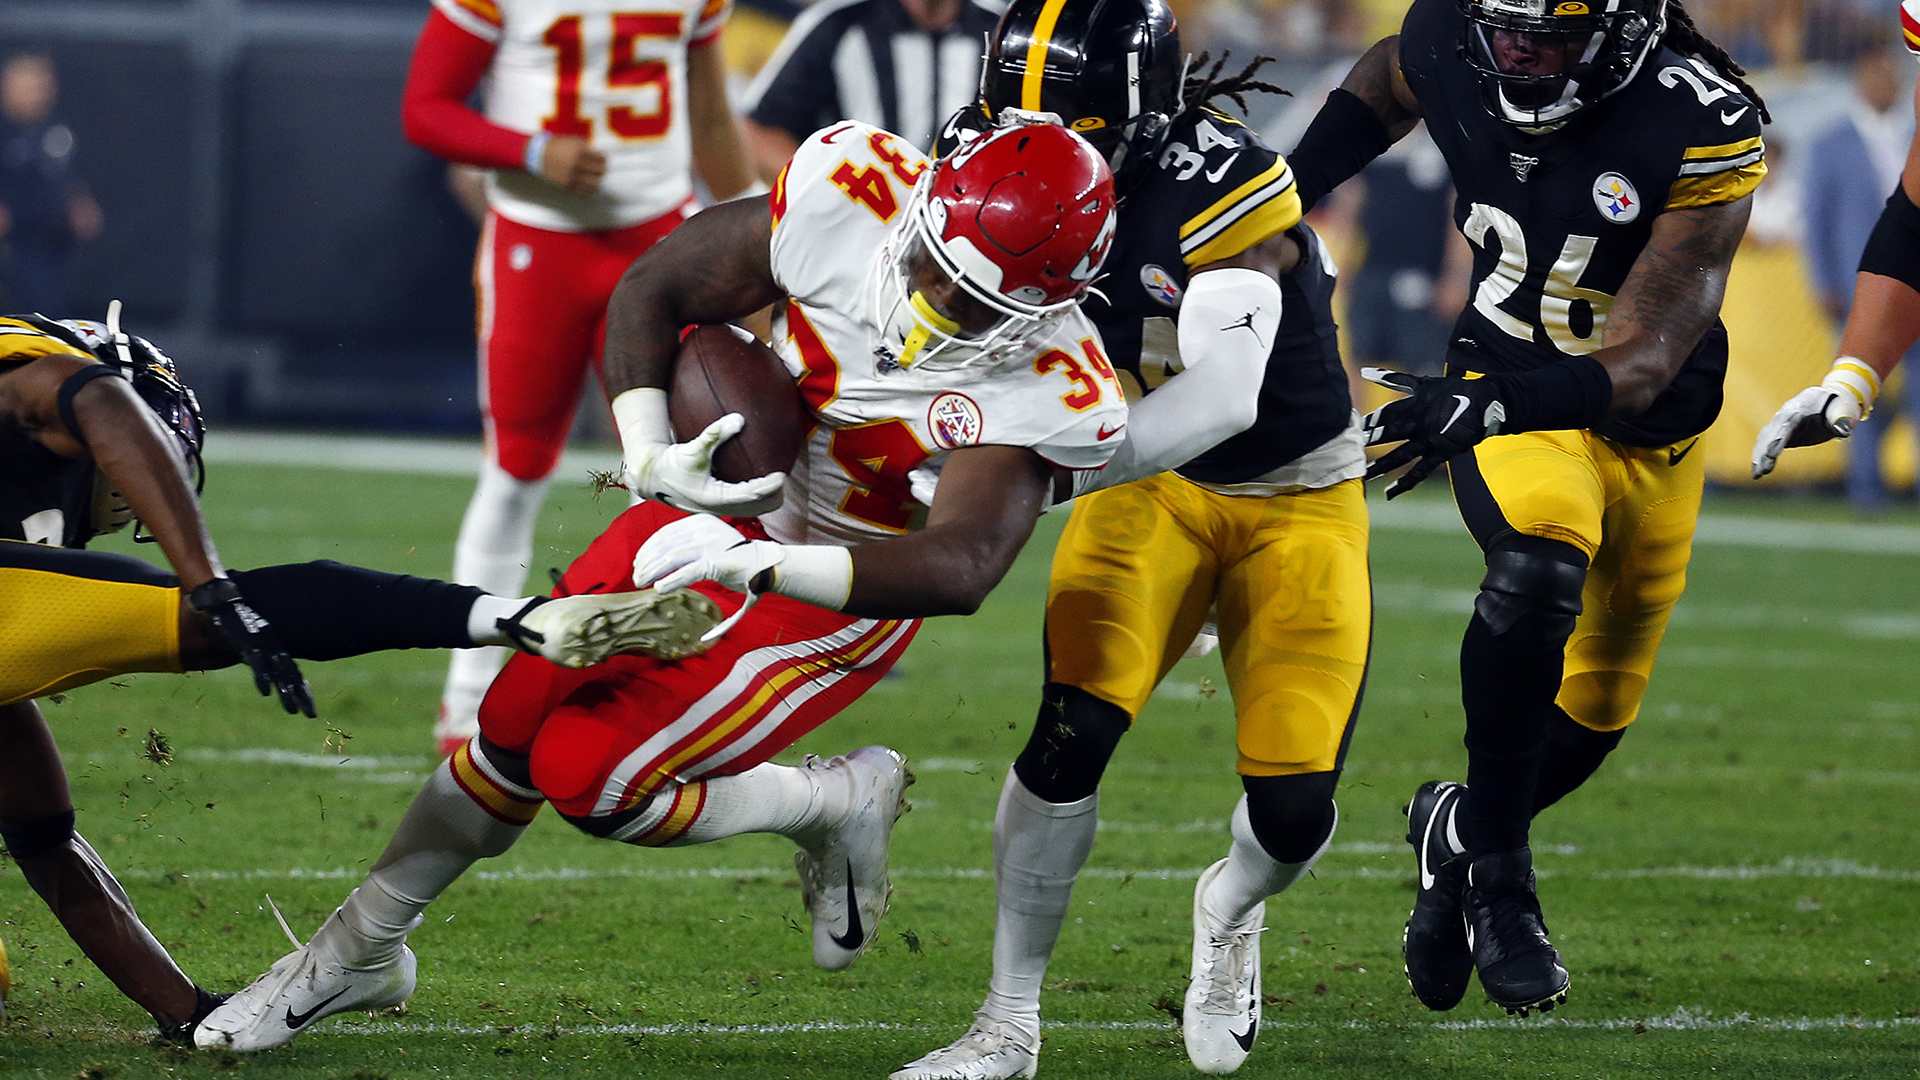 NFL trade rumors: Texans acquire Carlos Hyde from Chiefs in wake of Lamar Miller injury